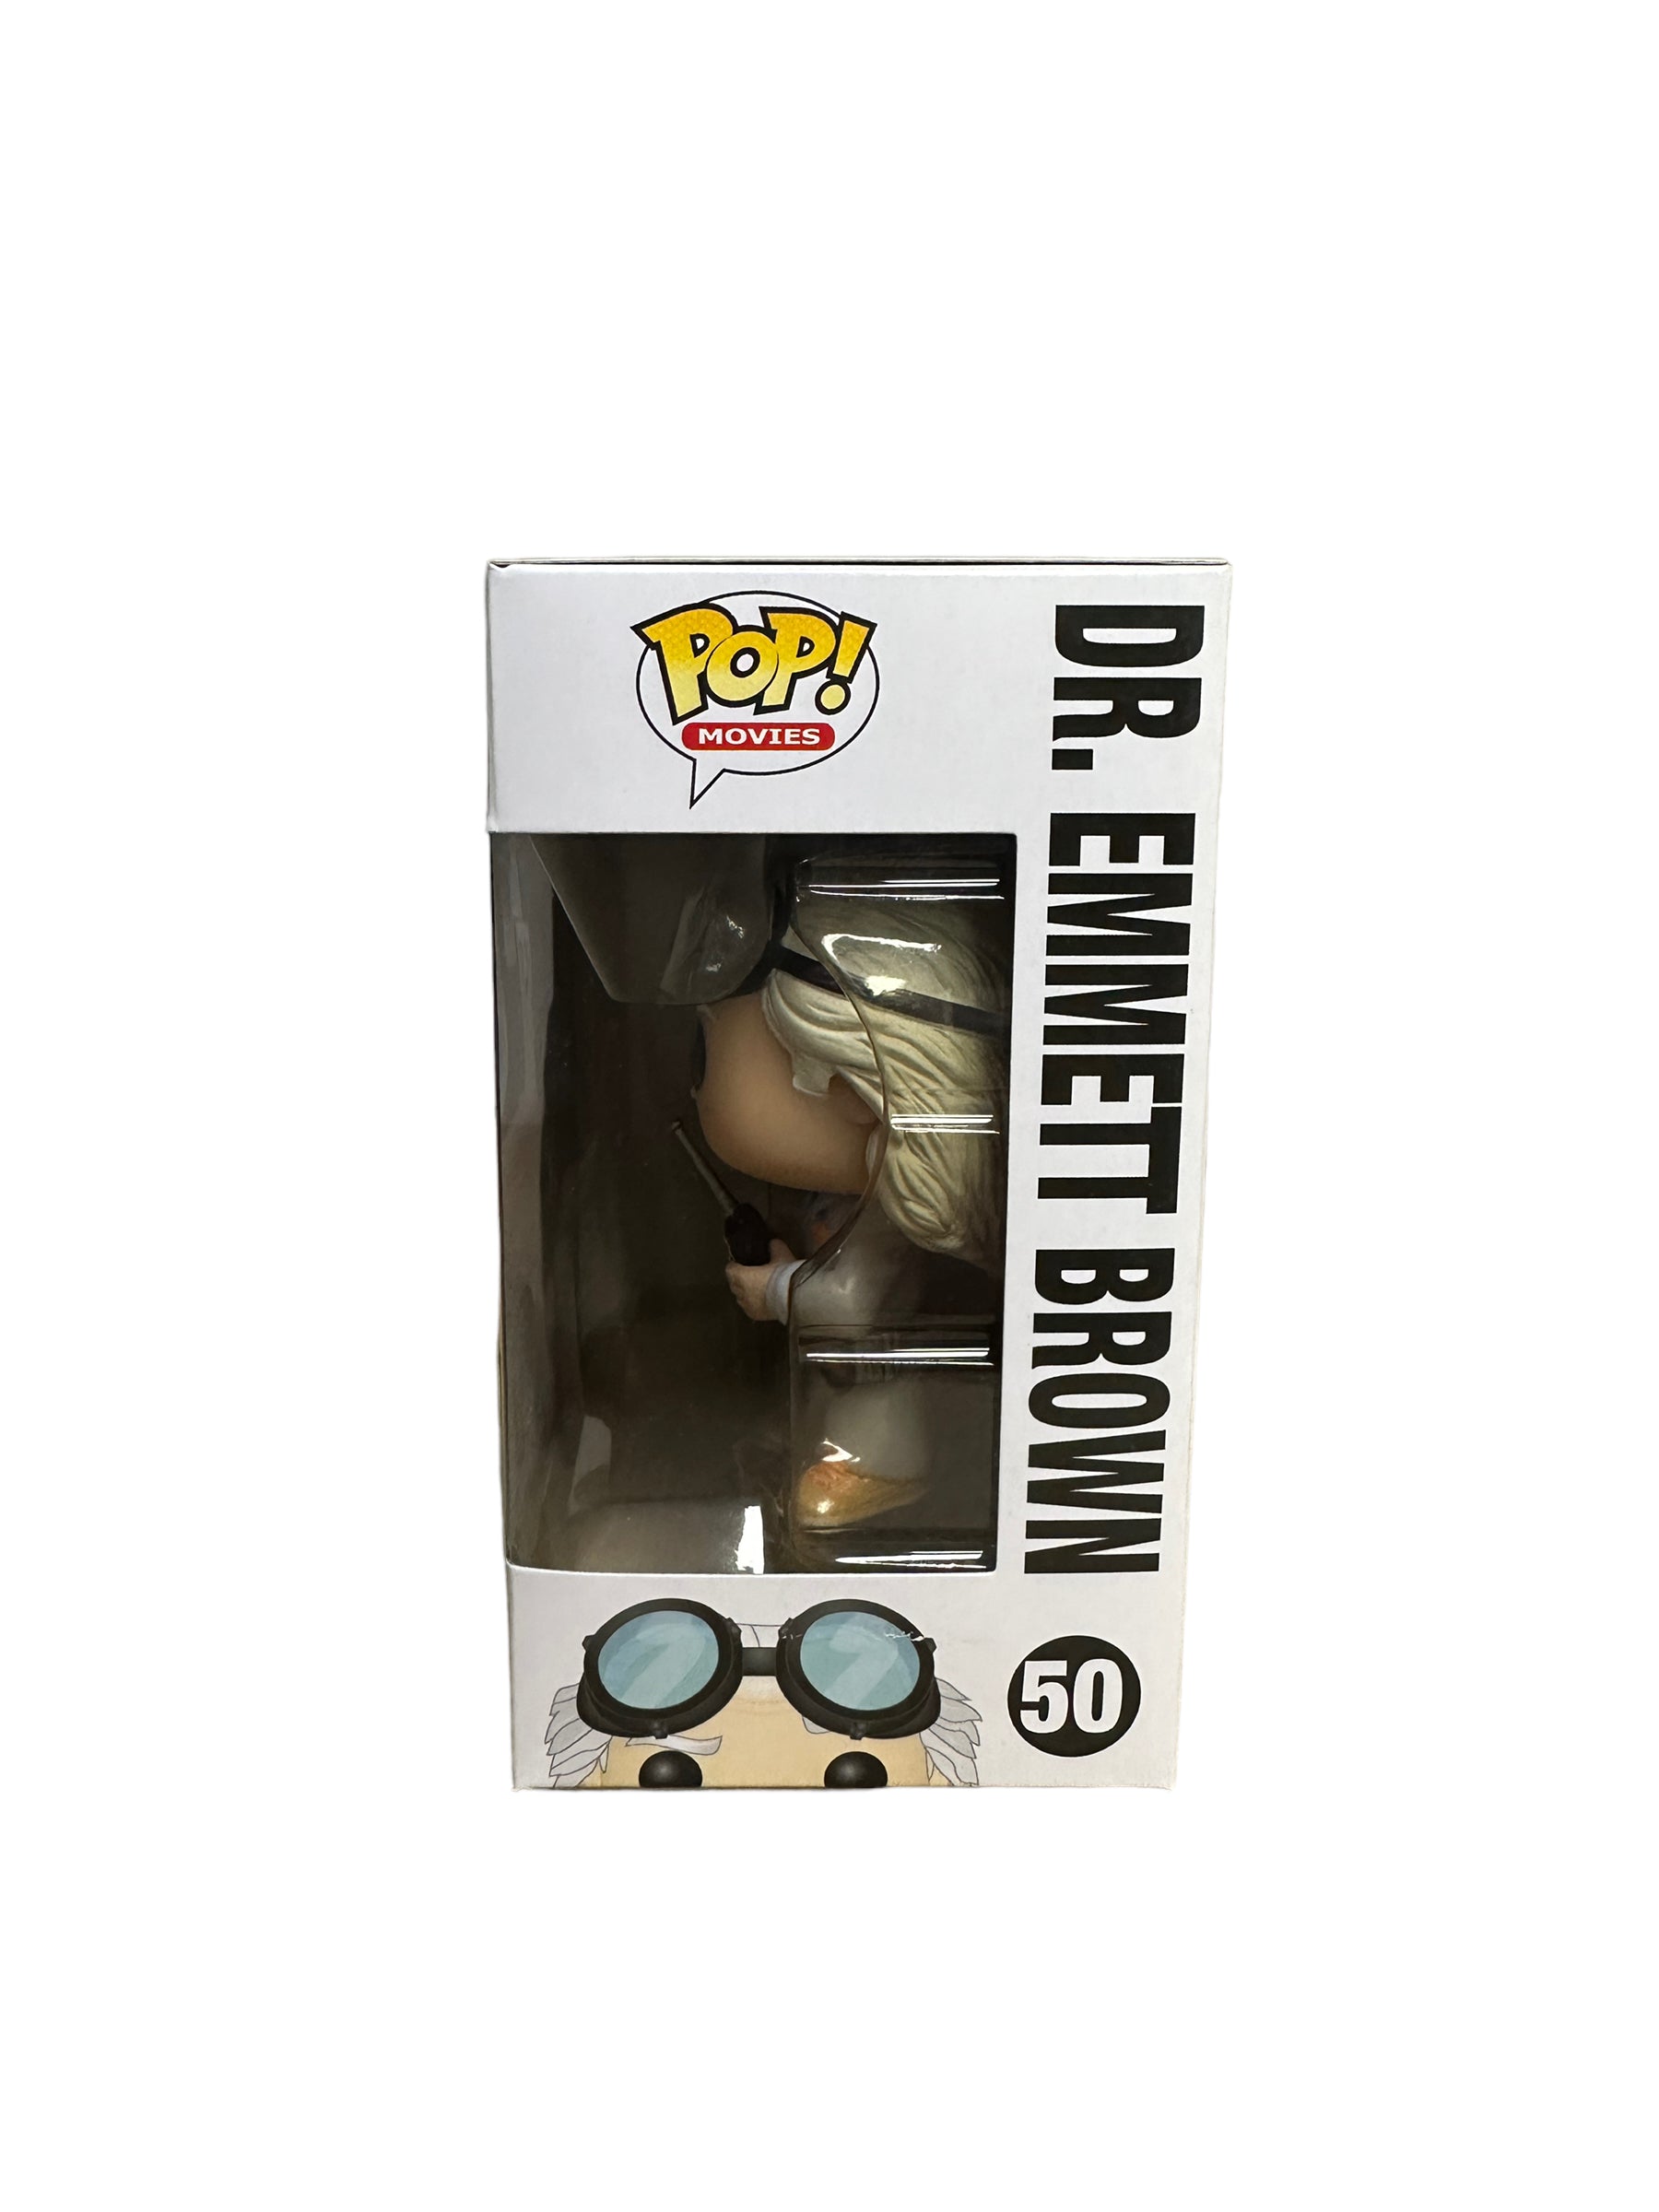 Dr. Emmett Brown #50 (Glows in the Dark) Funko Pop! - Back to the Future - 2014 Convention Exclusive - Condition 9/10